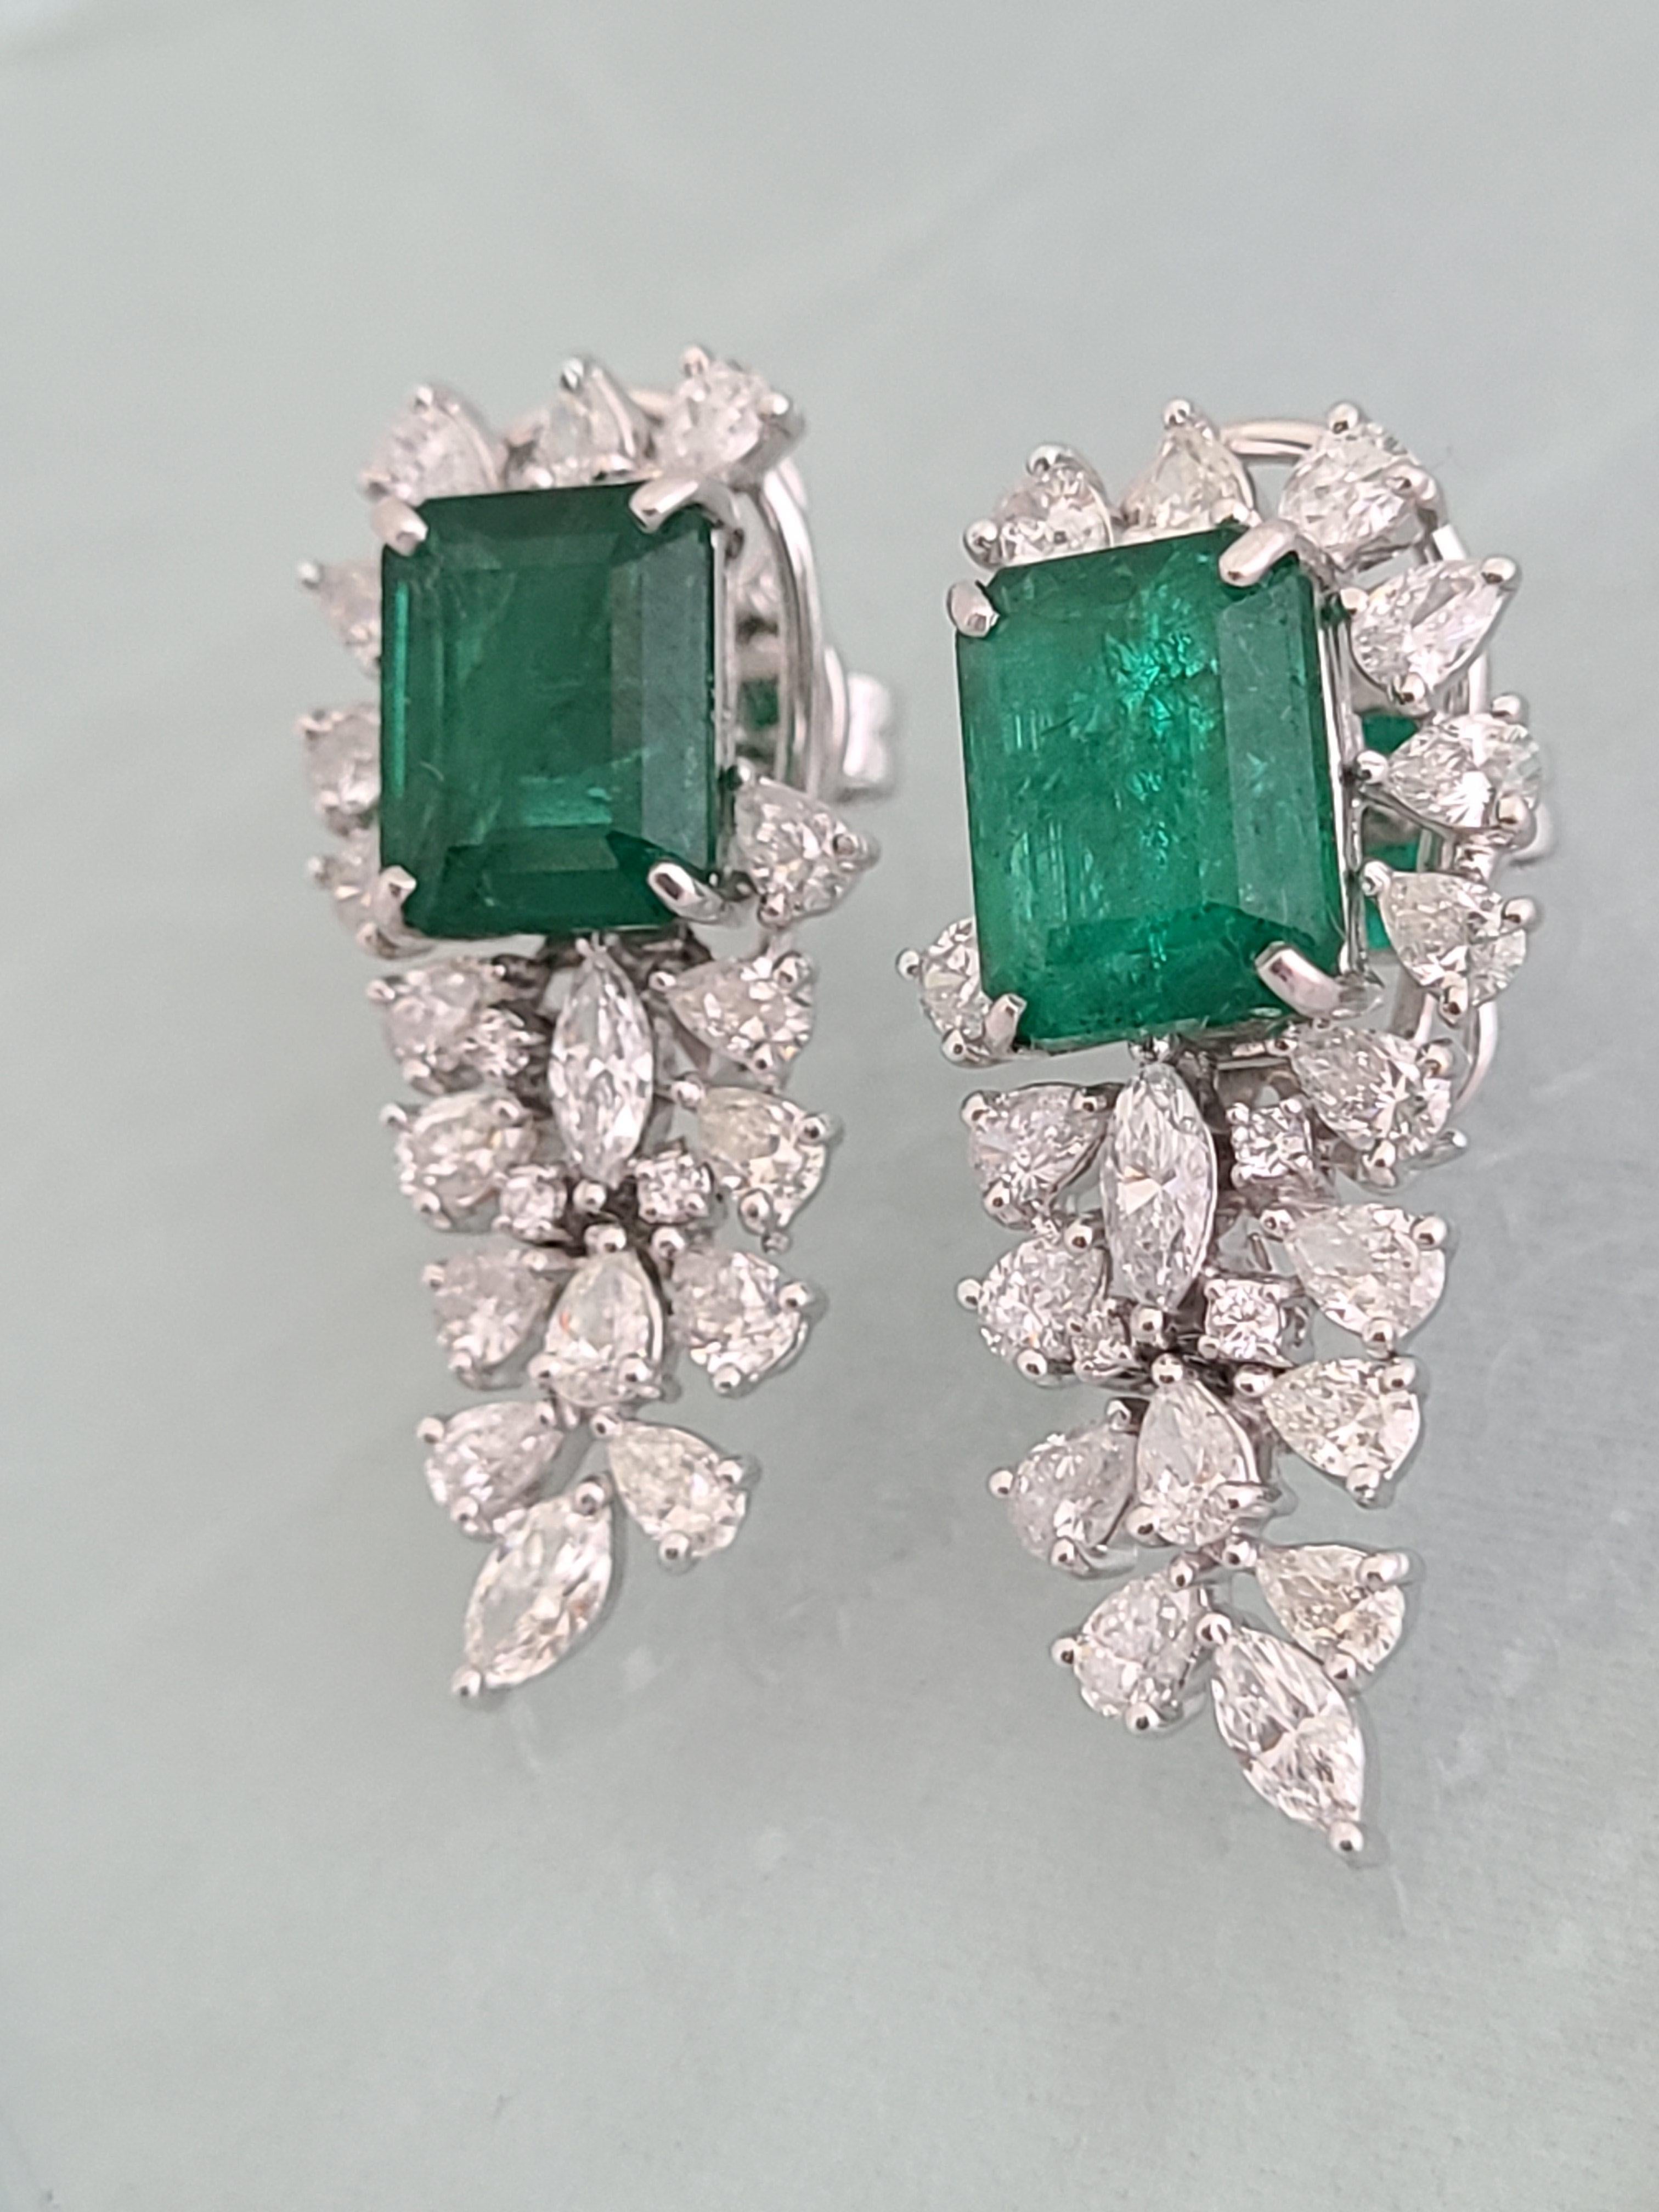 A gorgeous and chic Emerald earrings in 18k white gold with fancy cut natural diamonds. The emerald pair weight is 8.5 carats and is completely natural , diamond combined weight is 4.10 carats. The earrings dimensions in cm 3.3 x 1.5 x 2 (LXWXD).